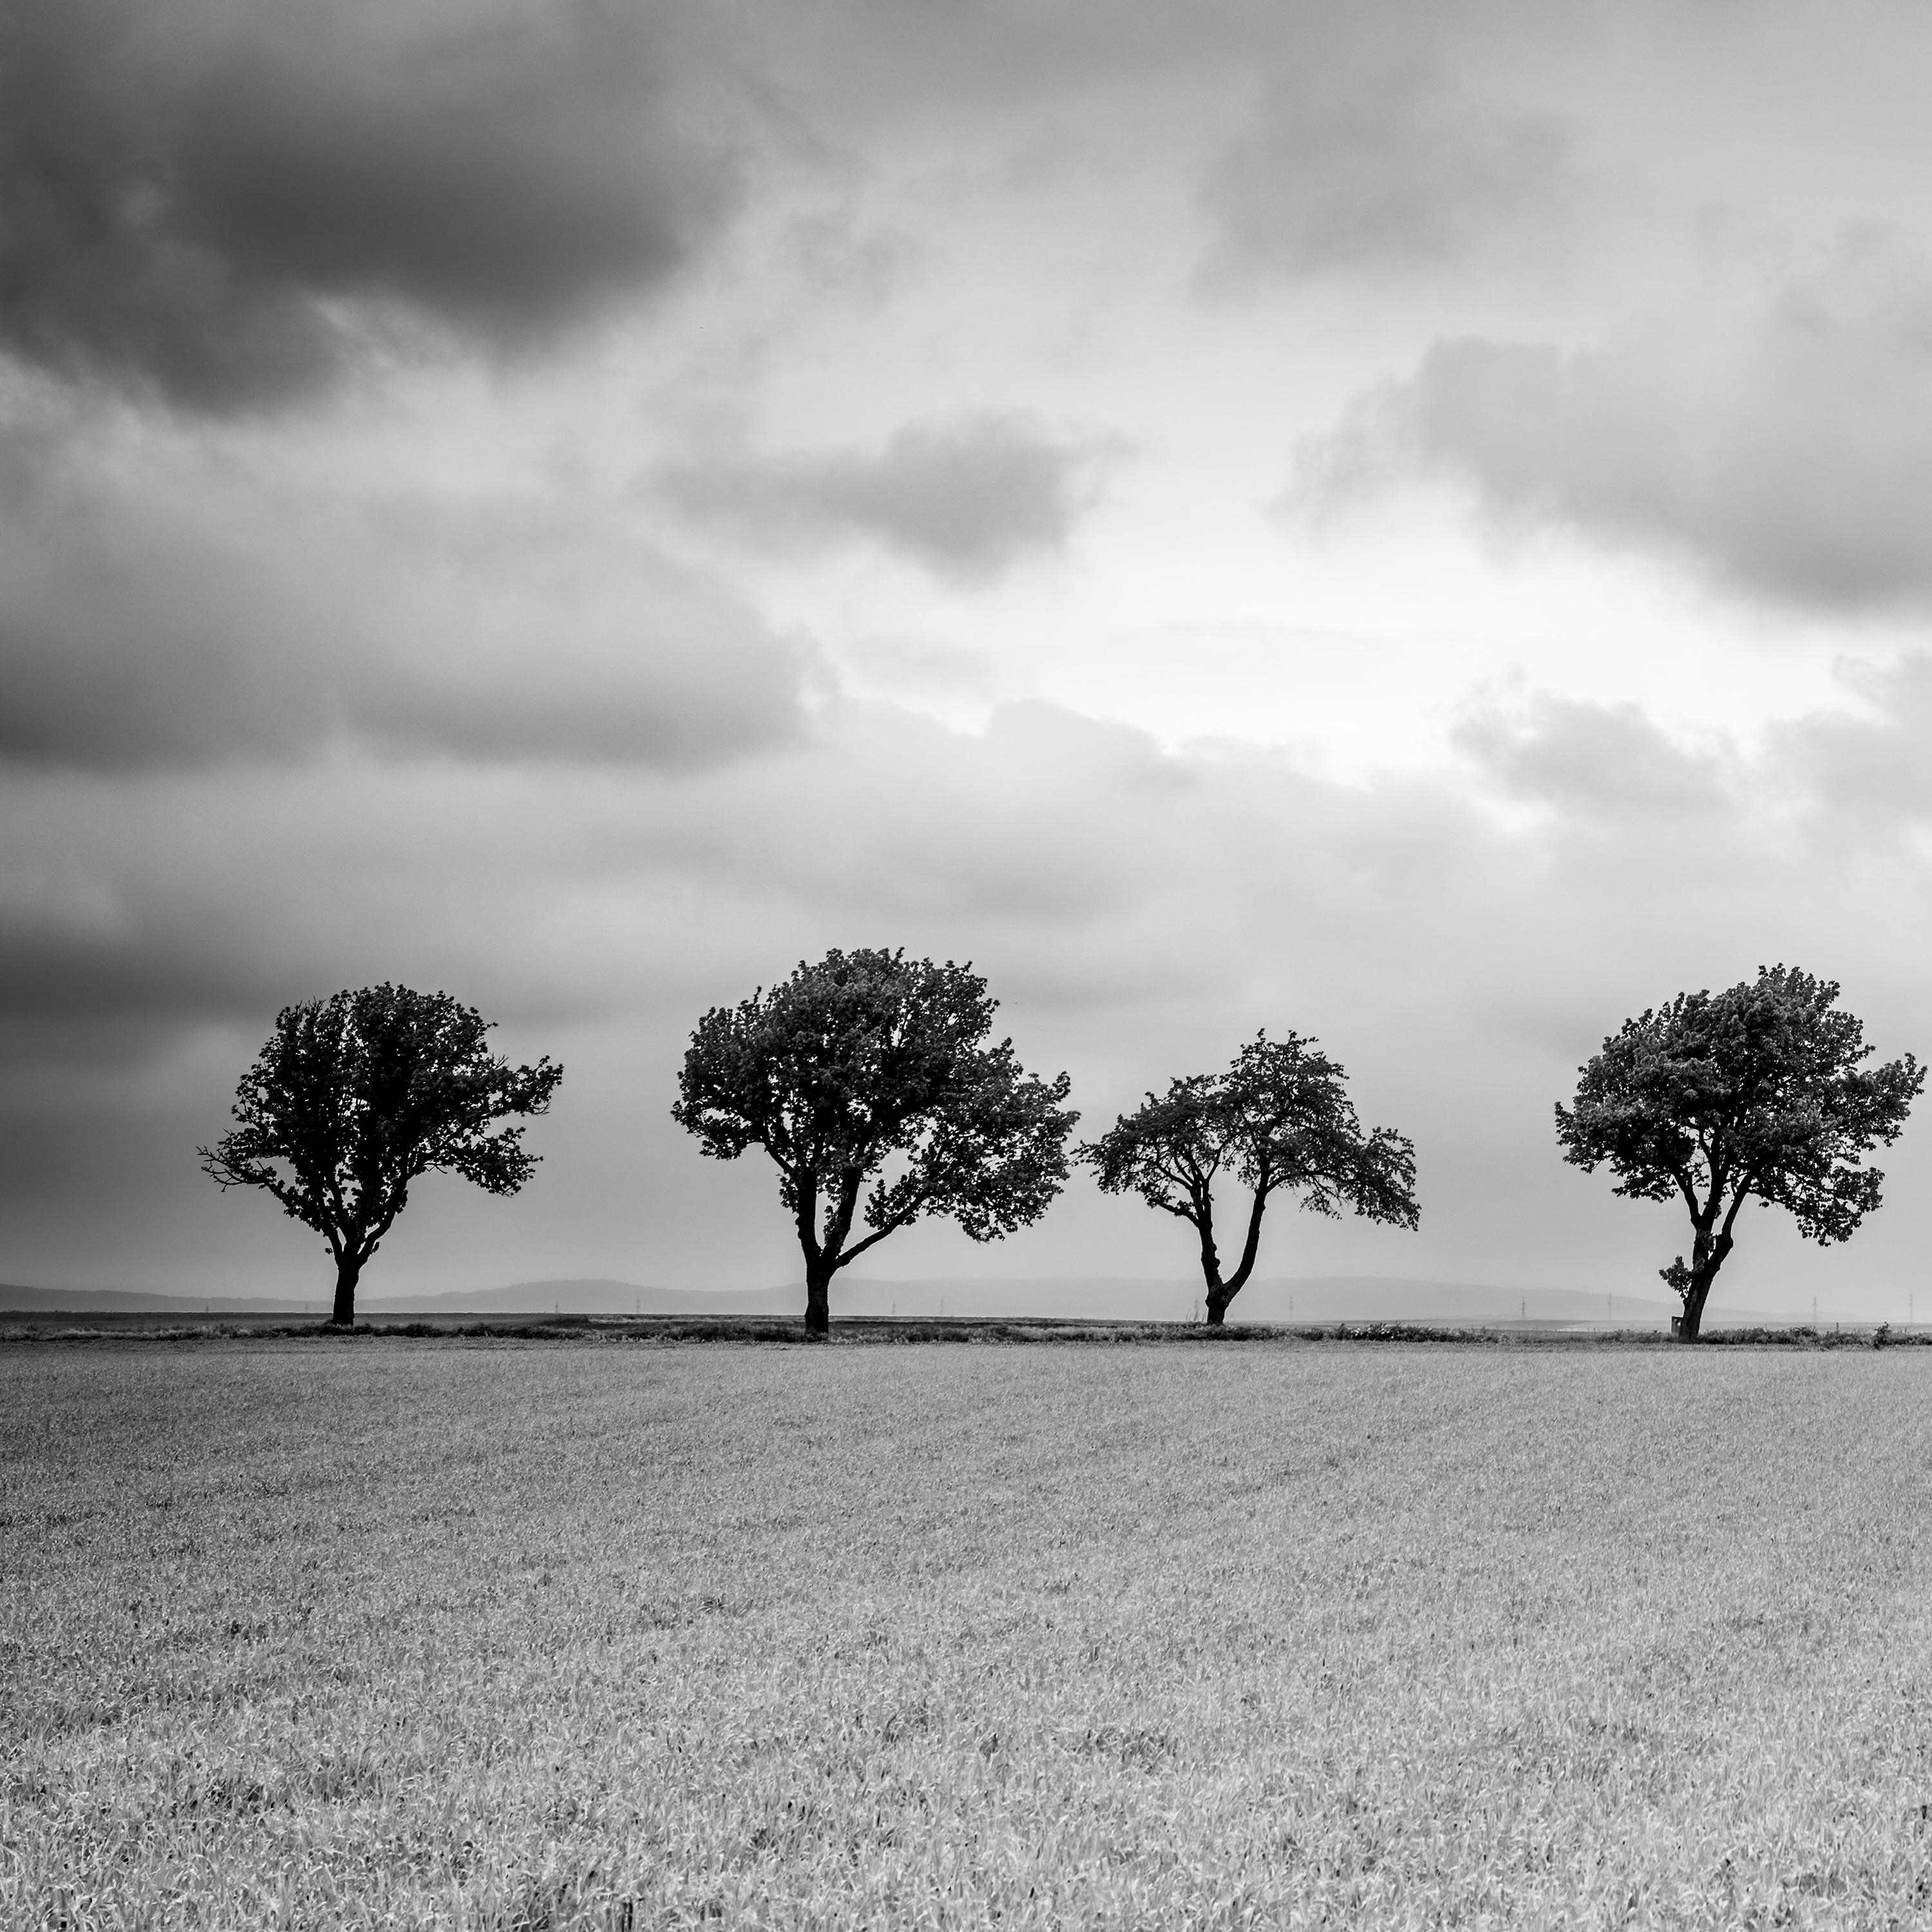 Trees on the edge of Field, cloudy, storm, black white art landscape photography For Sale 3